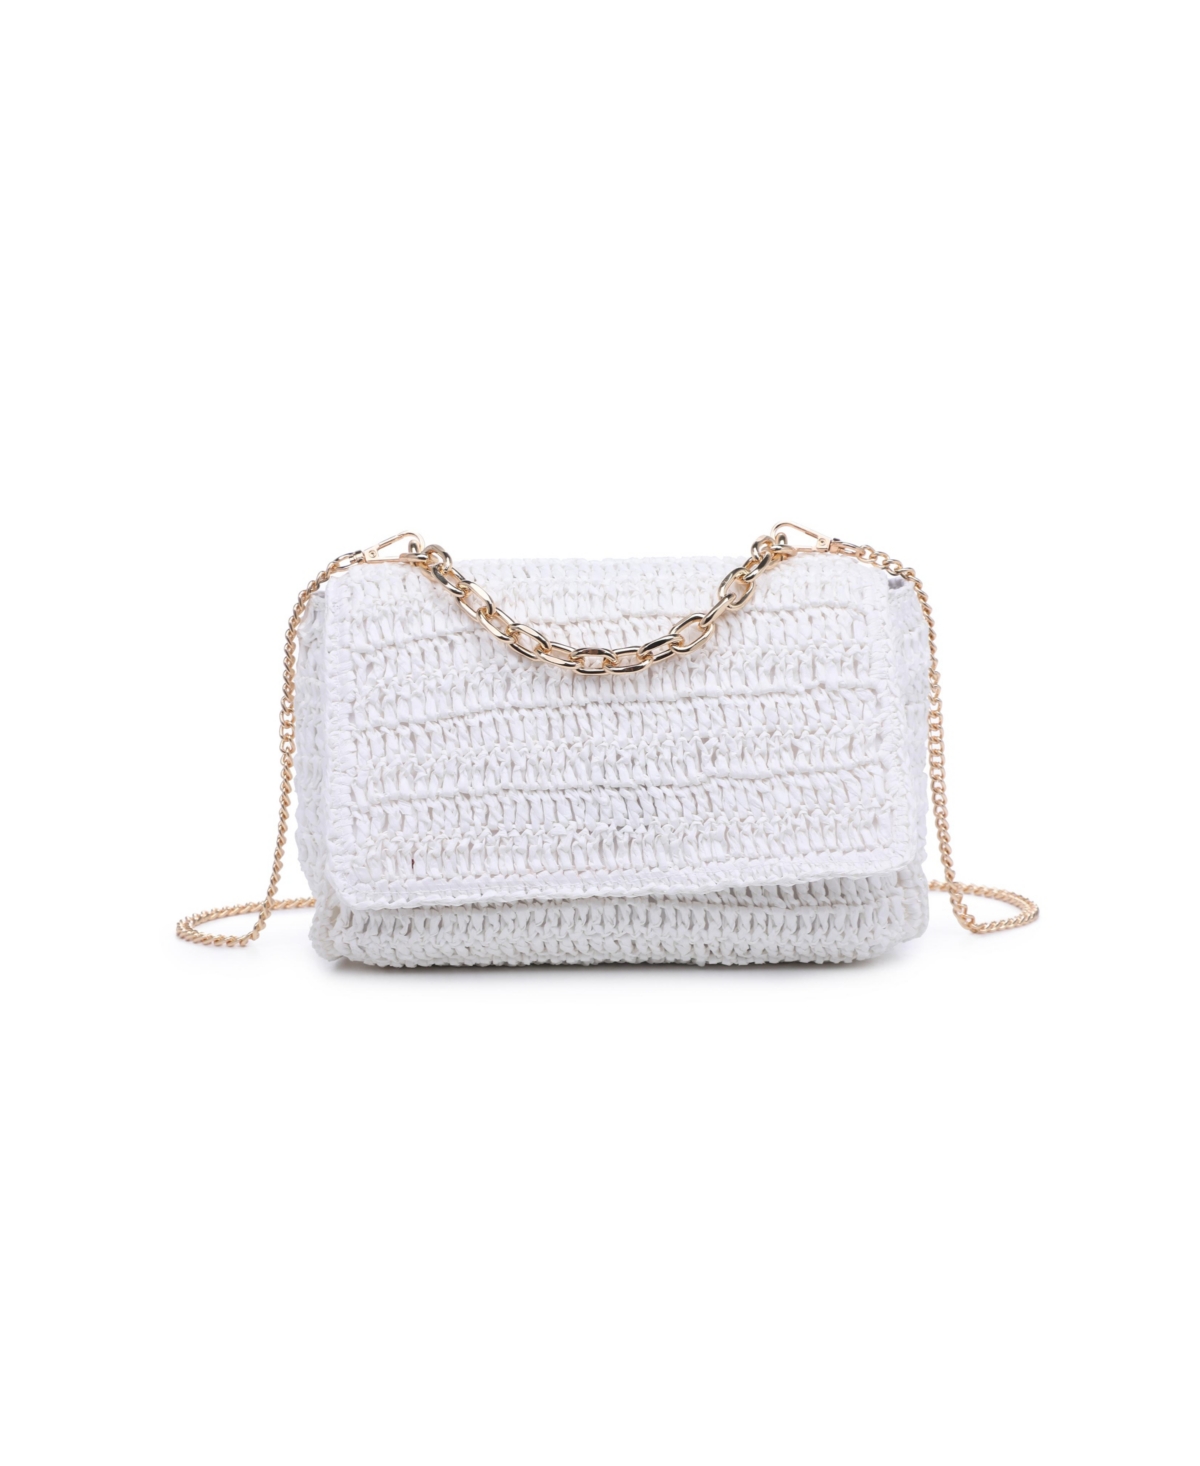 Urban Expressions Catalina Crossbody Bag In White